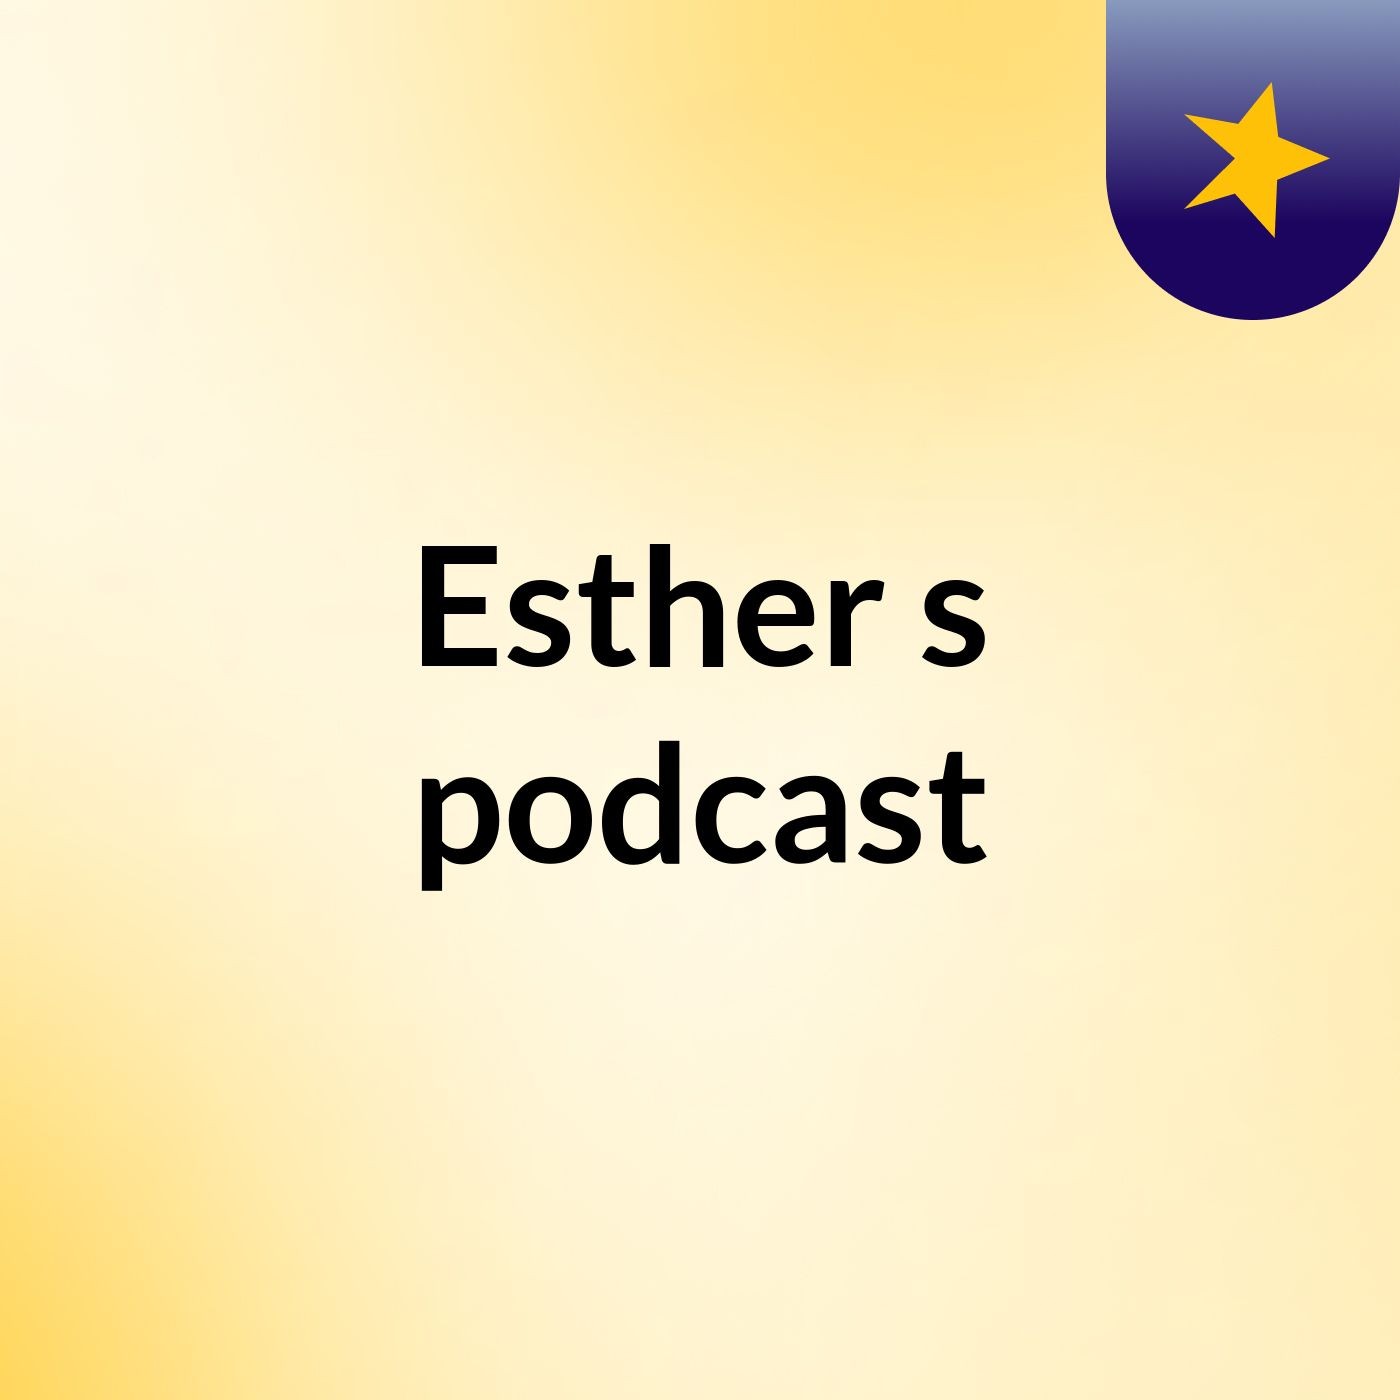 Episode 5 - Esther's podcast